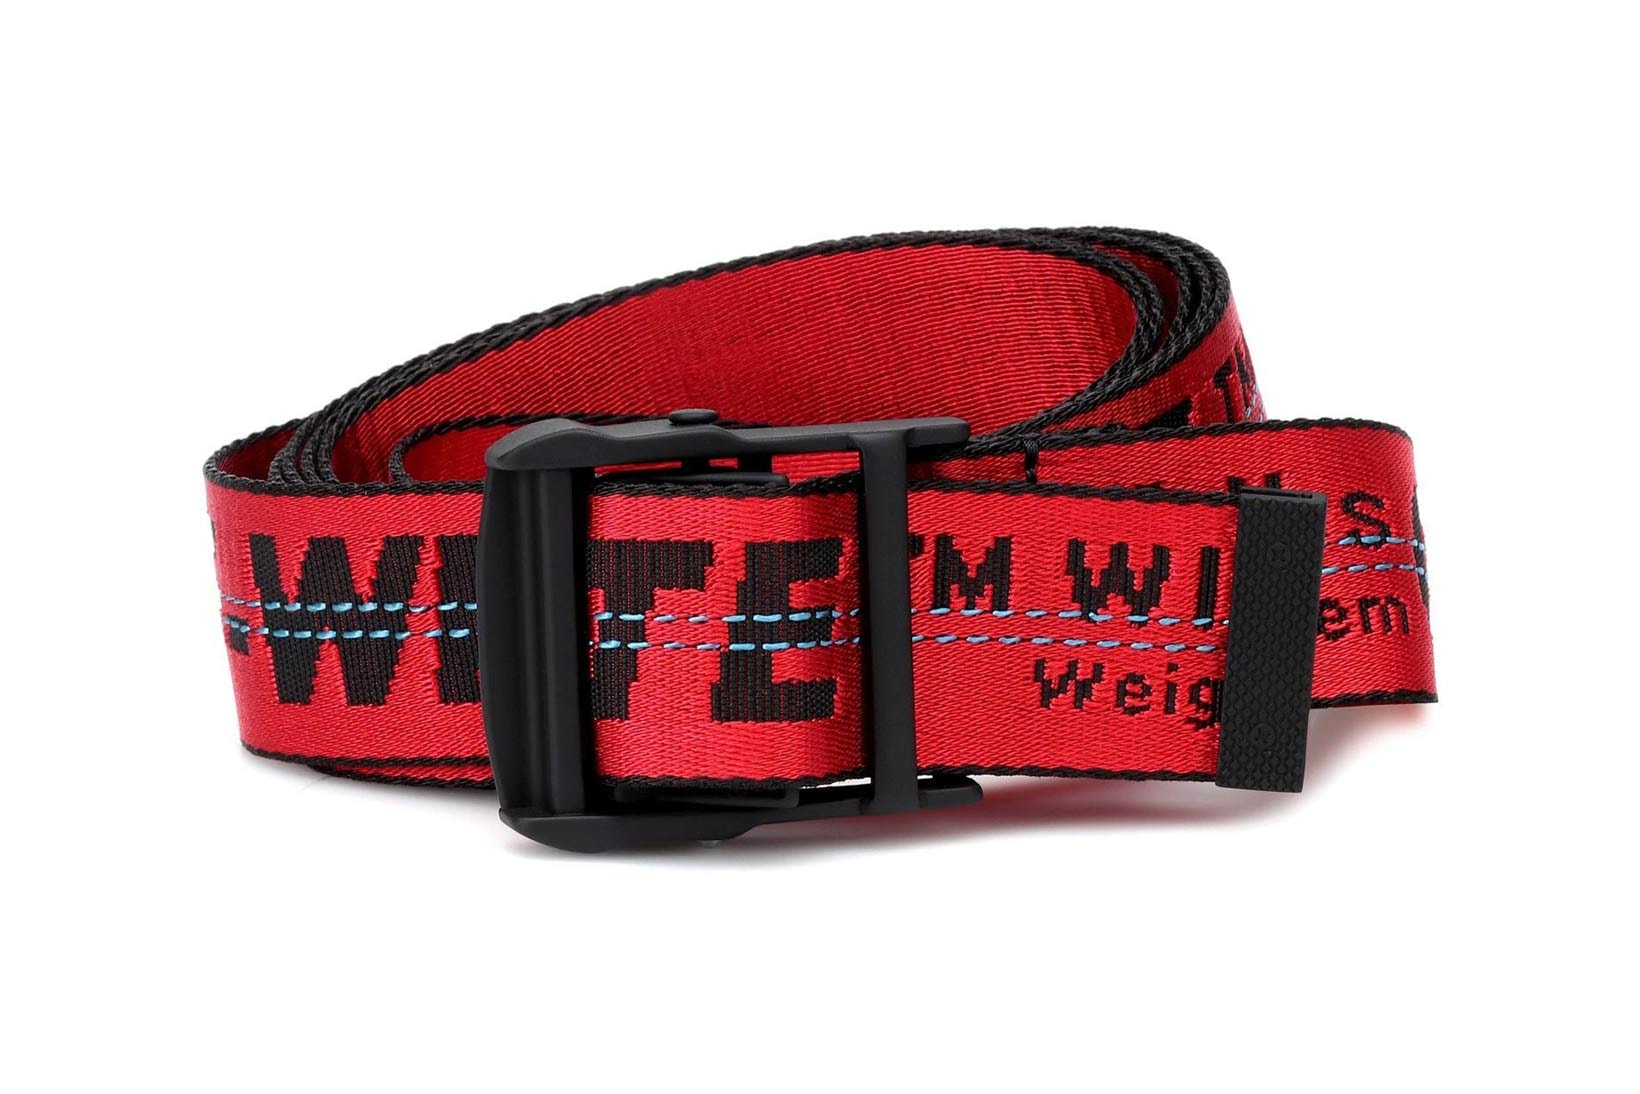 Off-White's Industrial Belt in Red